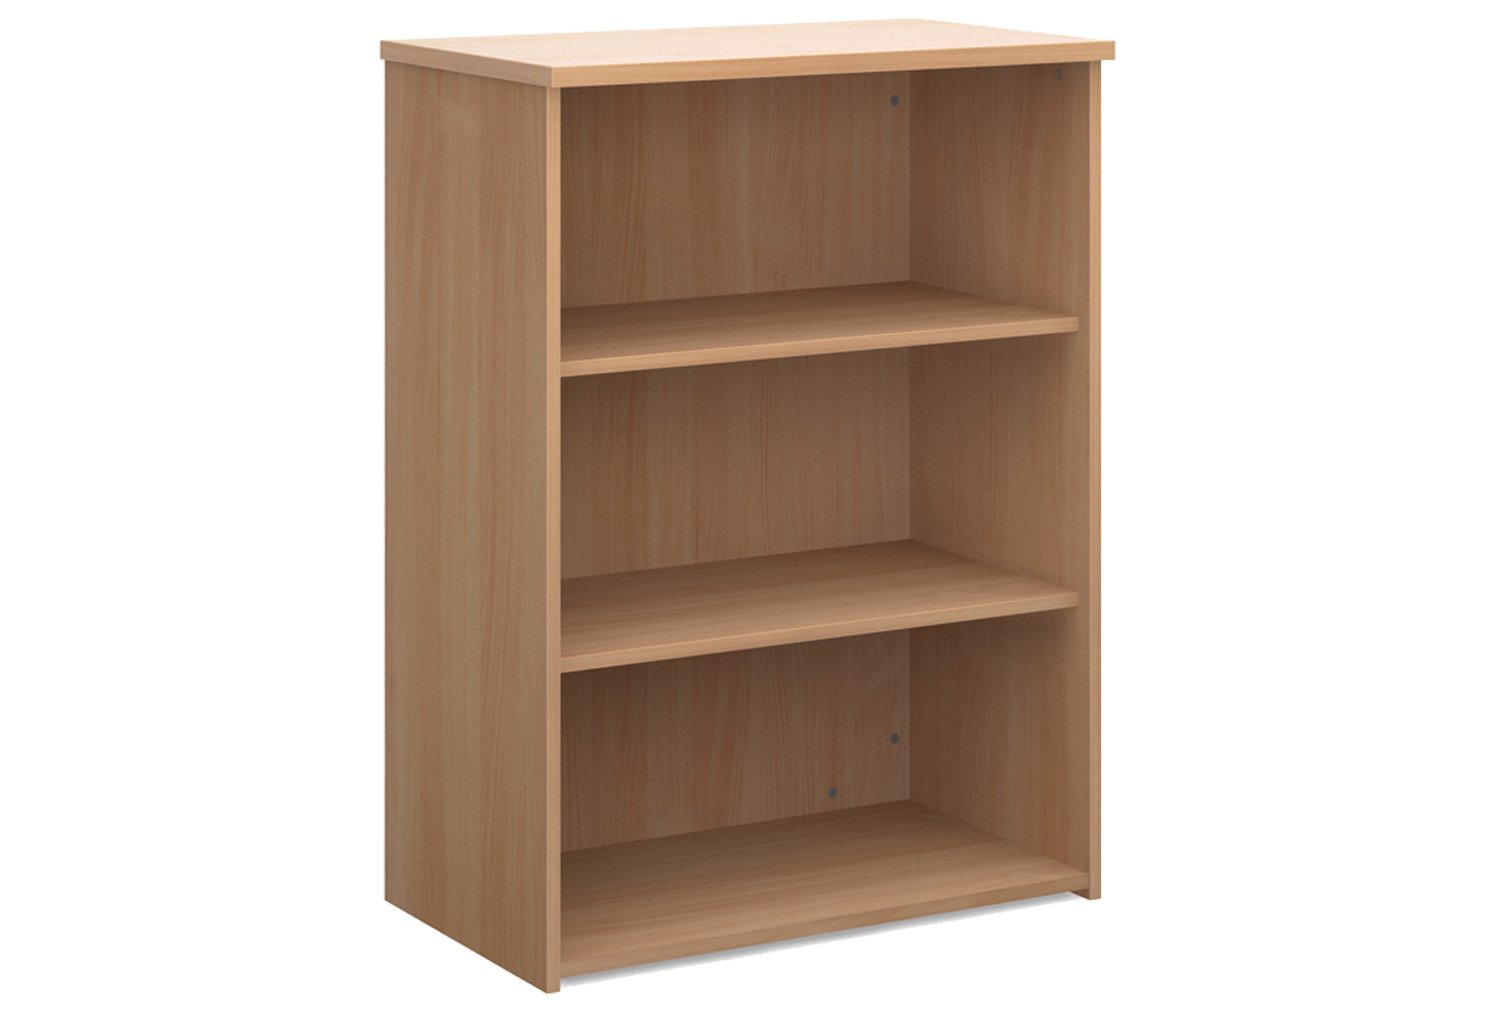 Tully Office Bookcases, 2 Shelf - 80wx47dx109h (cm), Beech